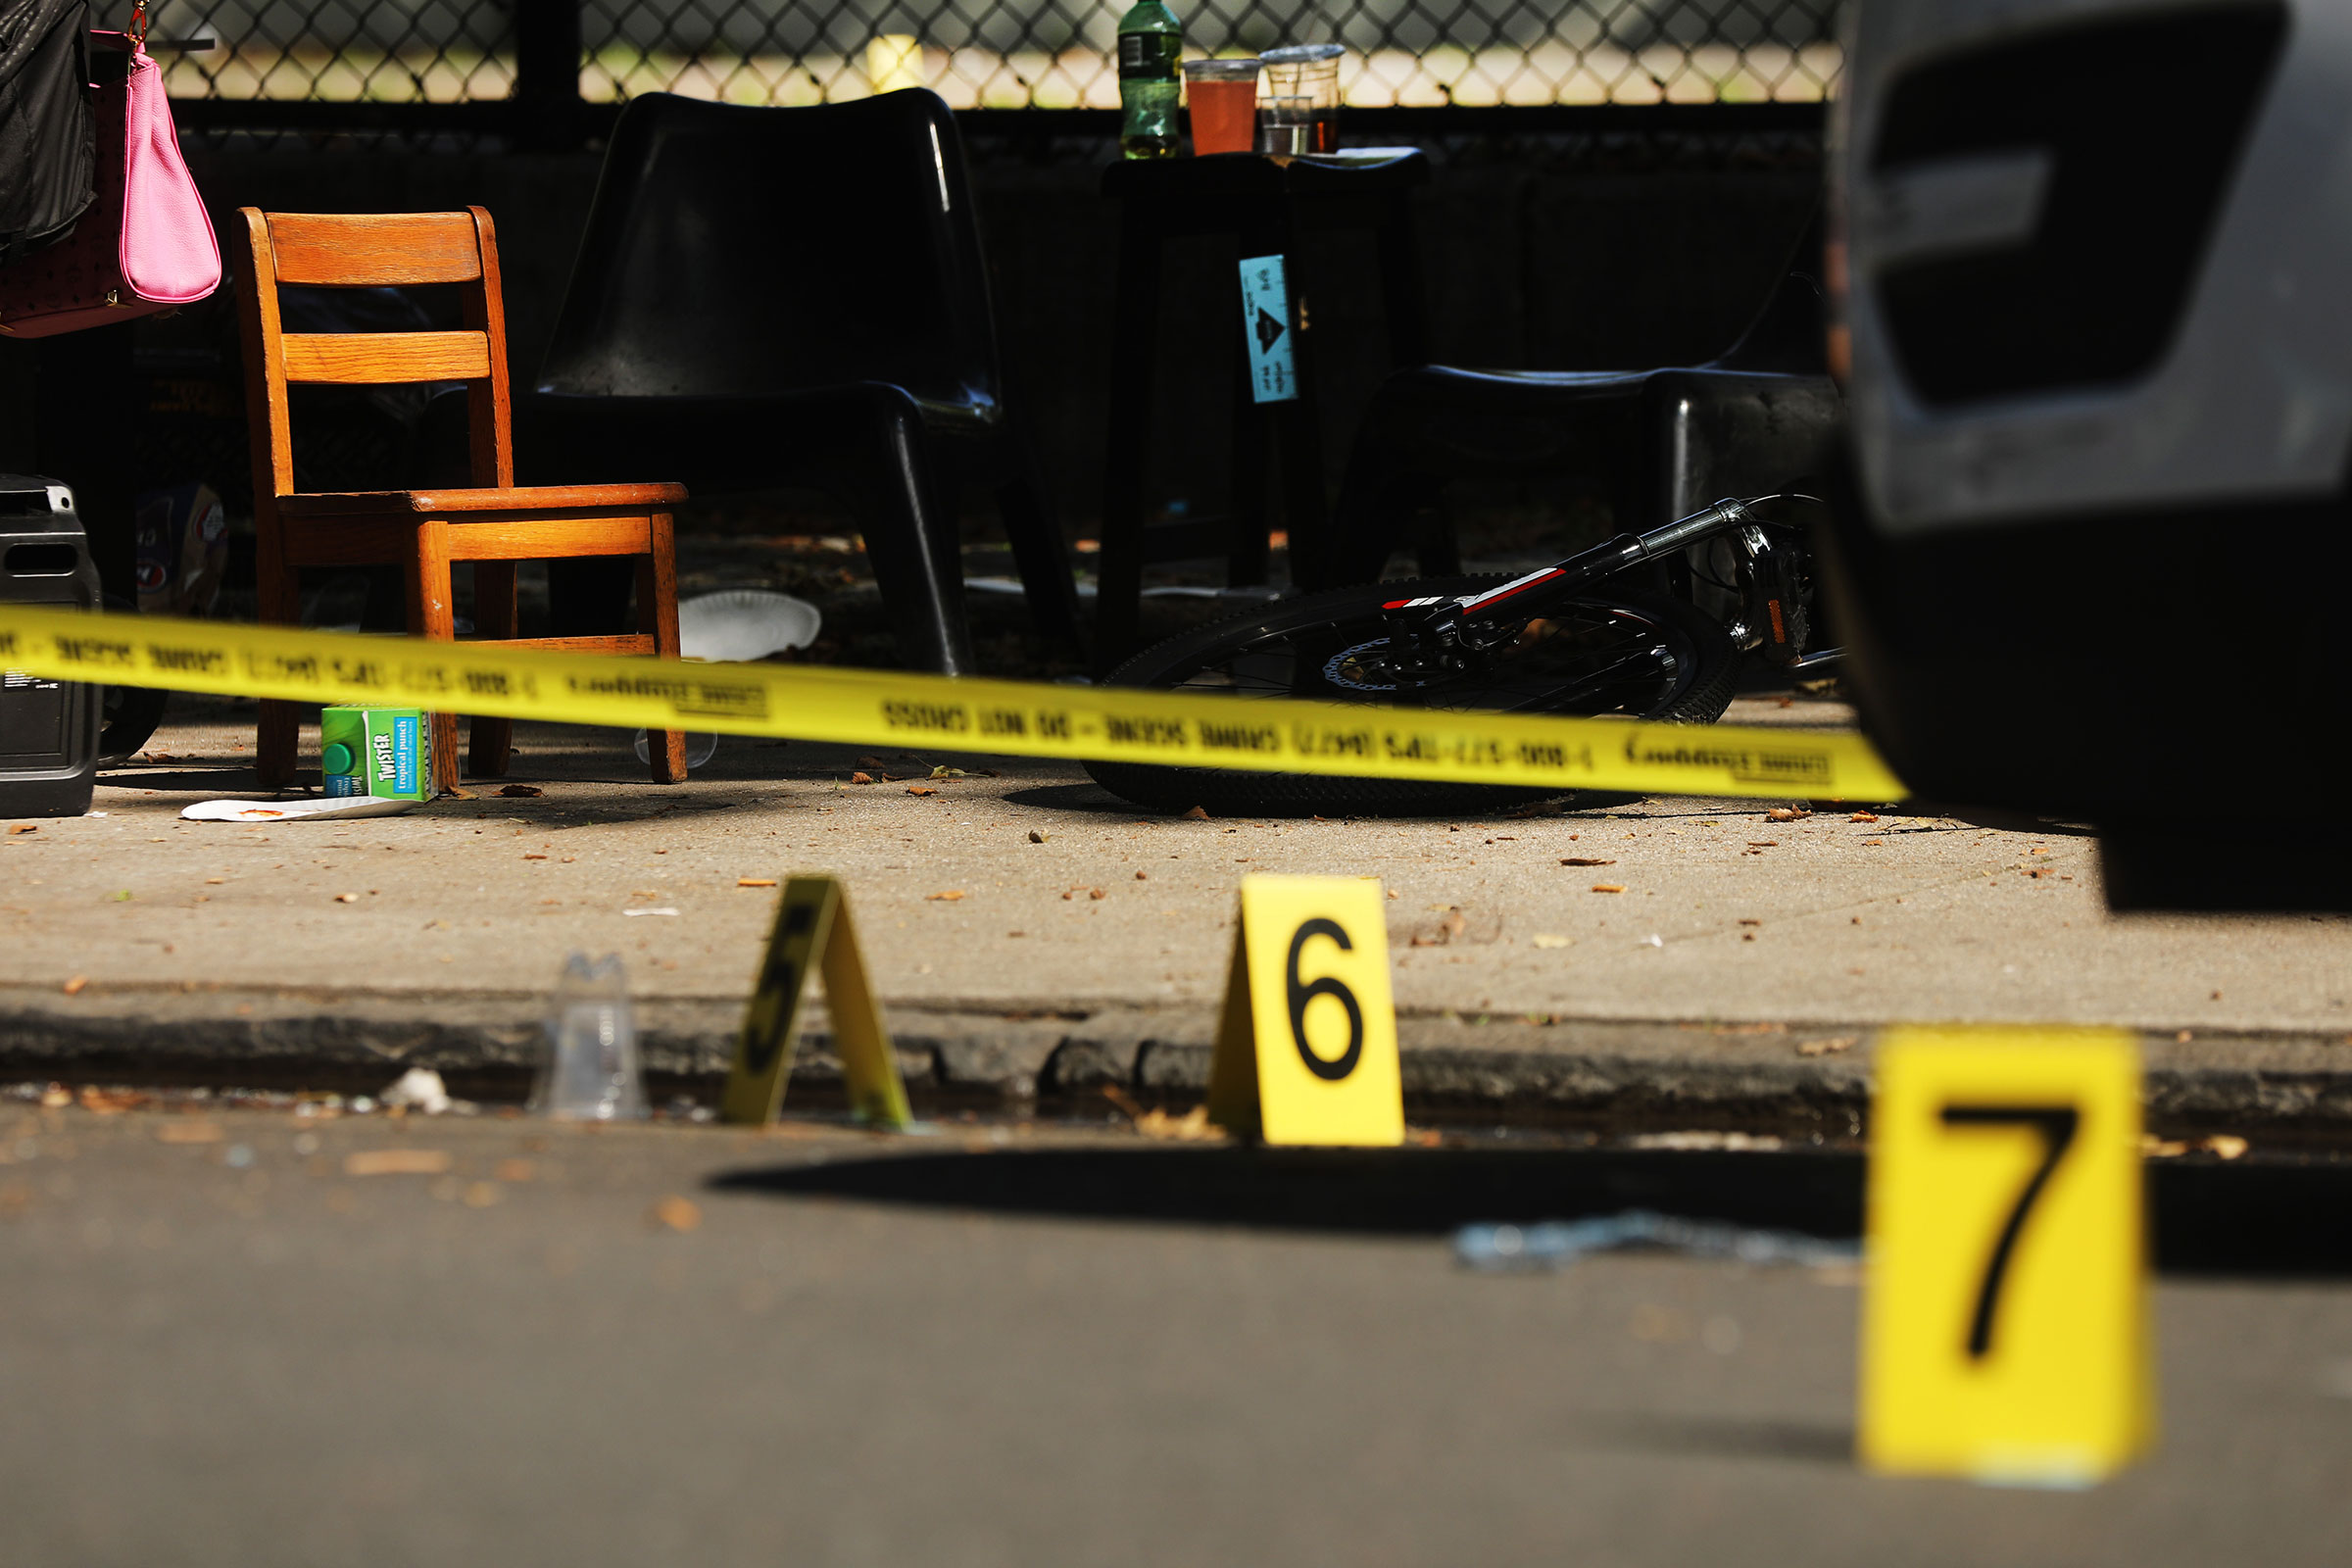 Police ballistic markers stand beside a child's chair and bicycle at a crime scene in Brooklyn where a one year old child was shot and killed on July 13, 2020 in New York City